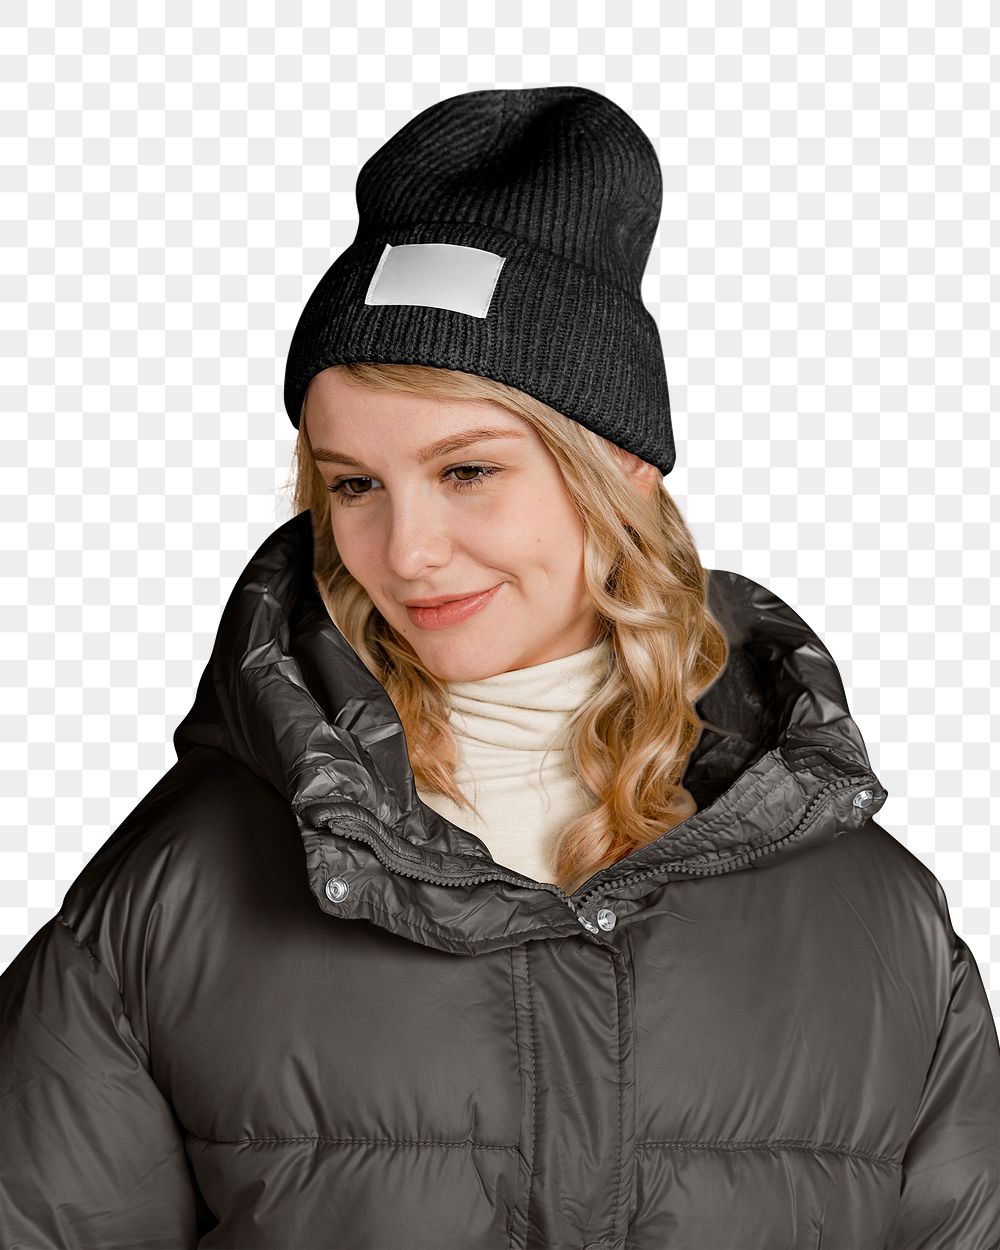 Woman in puffer jacket png sticker, transparent background